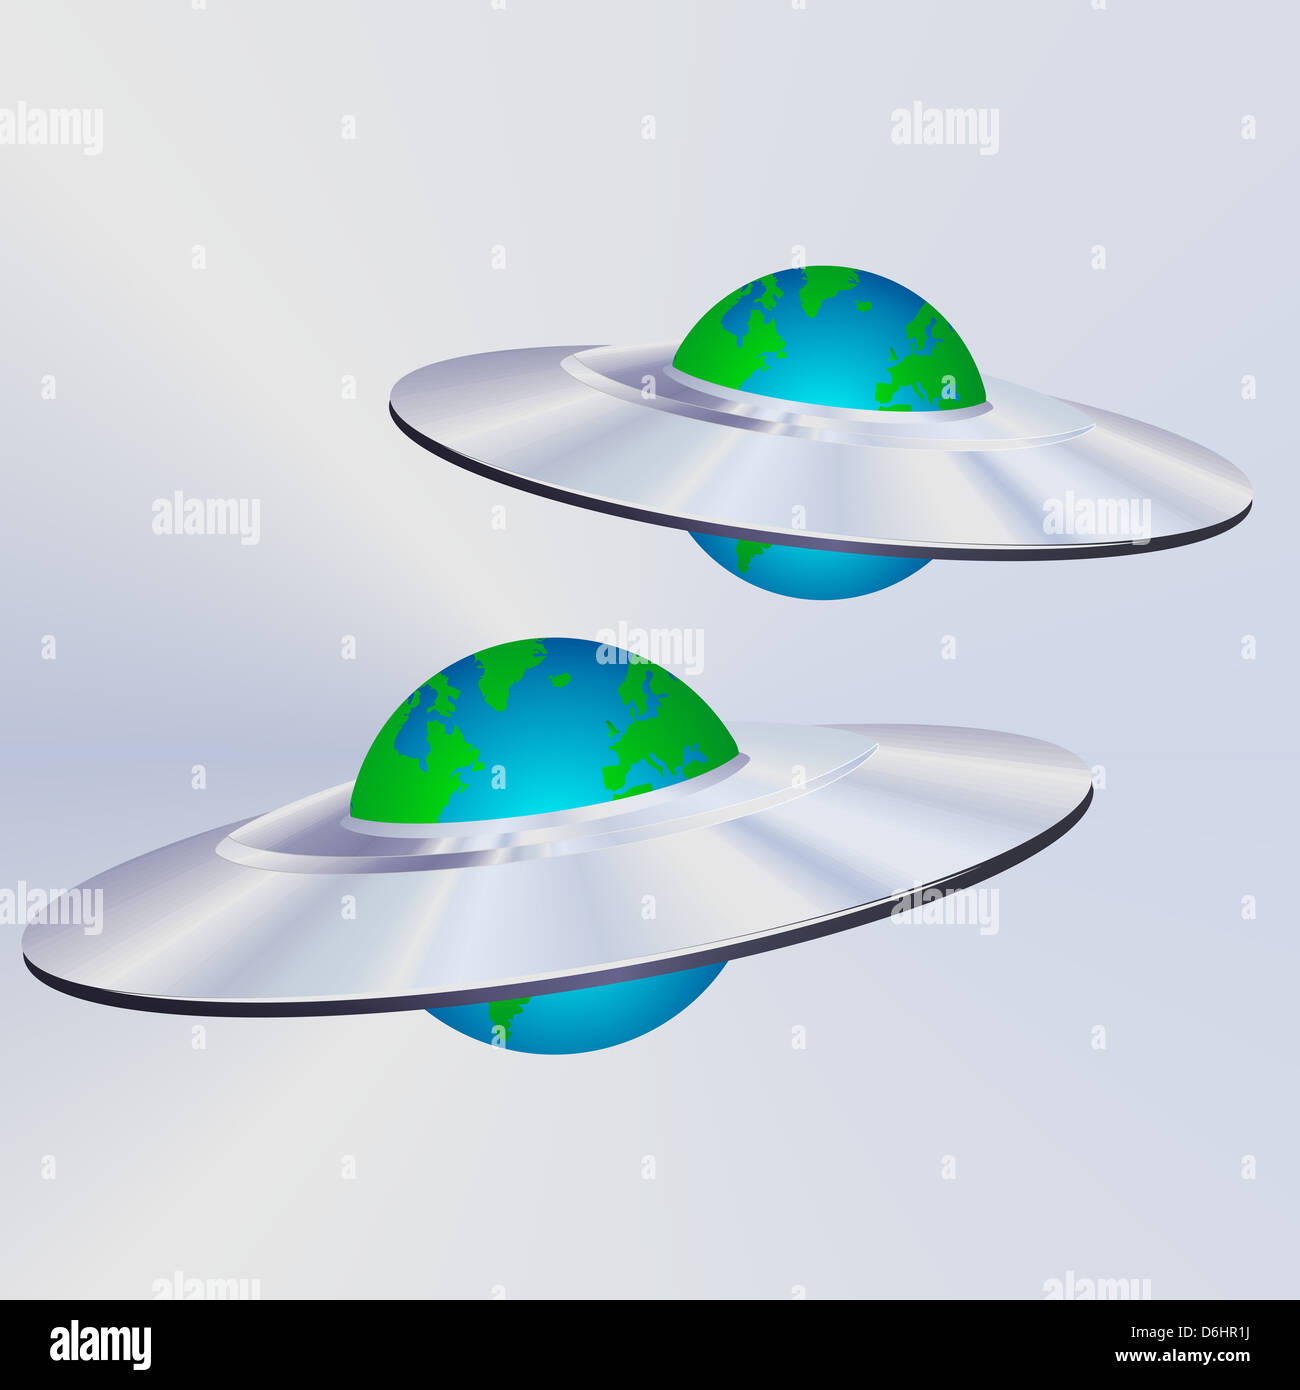 2 earth like habitable planets discovered illustrated as two alien UFO's Stock Photo